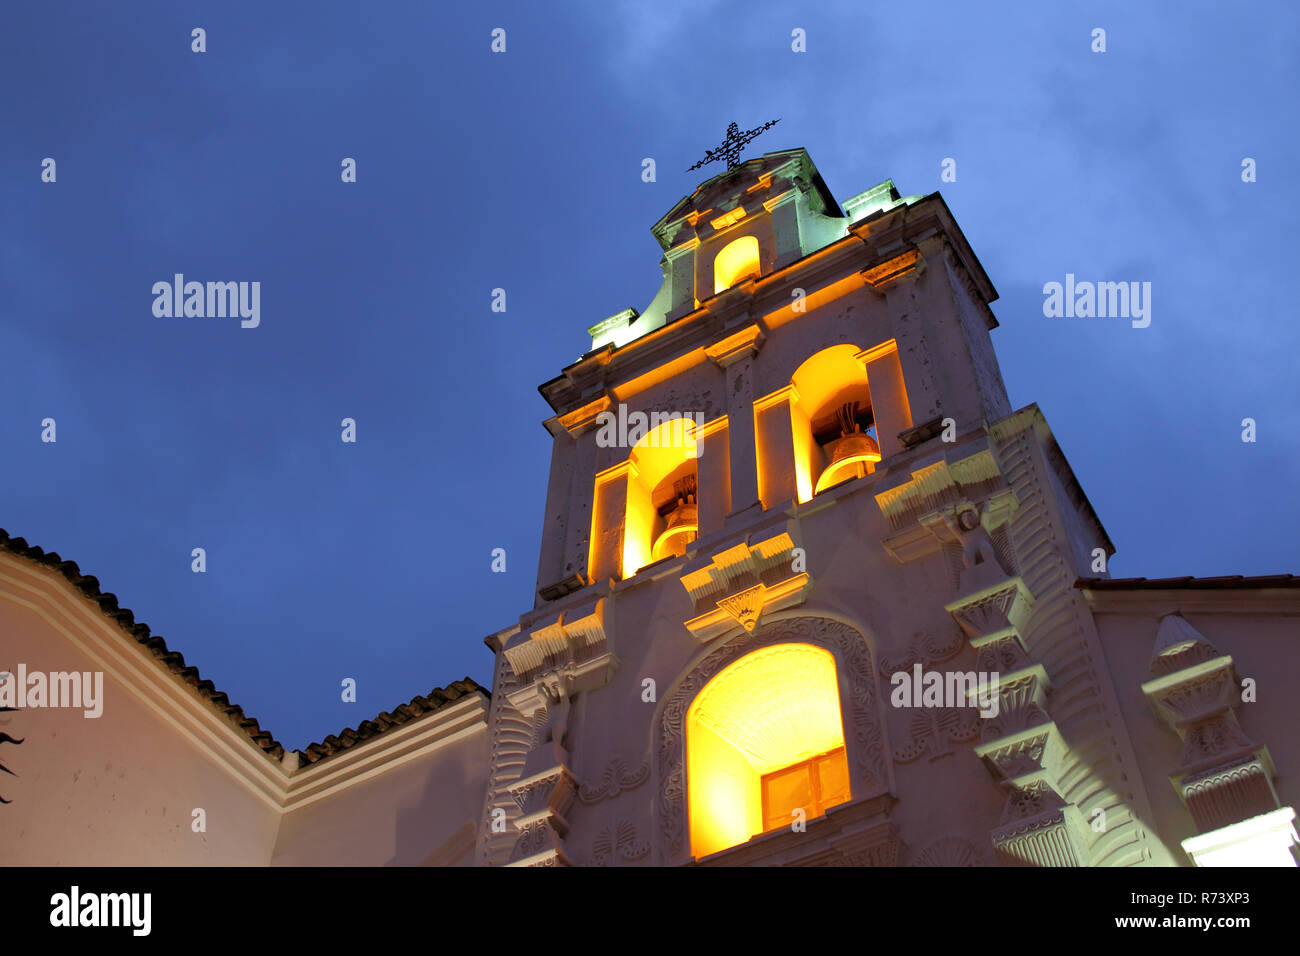 San Miguel temple at night in Sucre Bolivia. Bolivia capital city religious temple Stock Photo